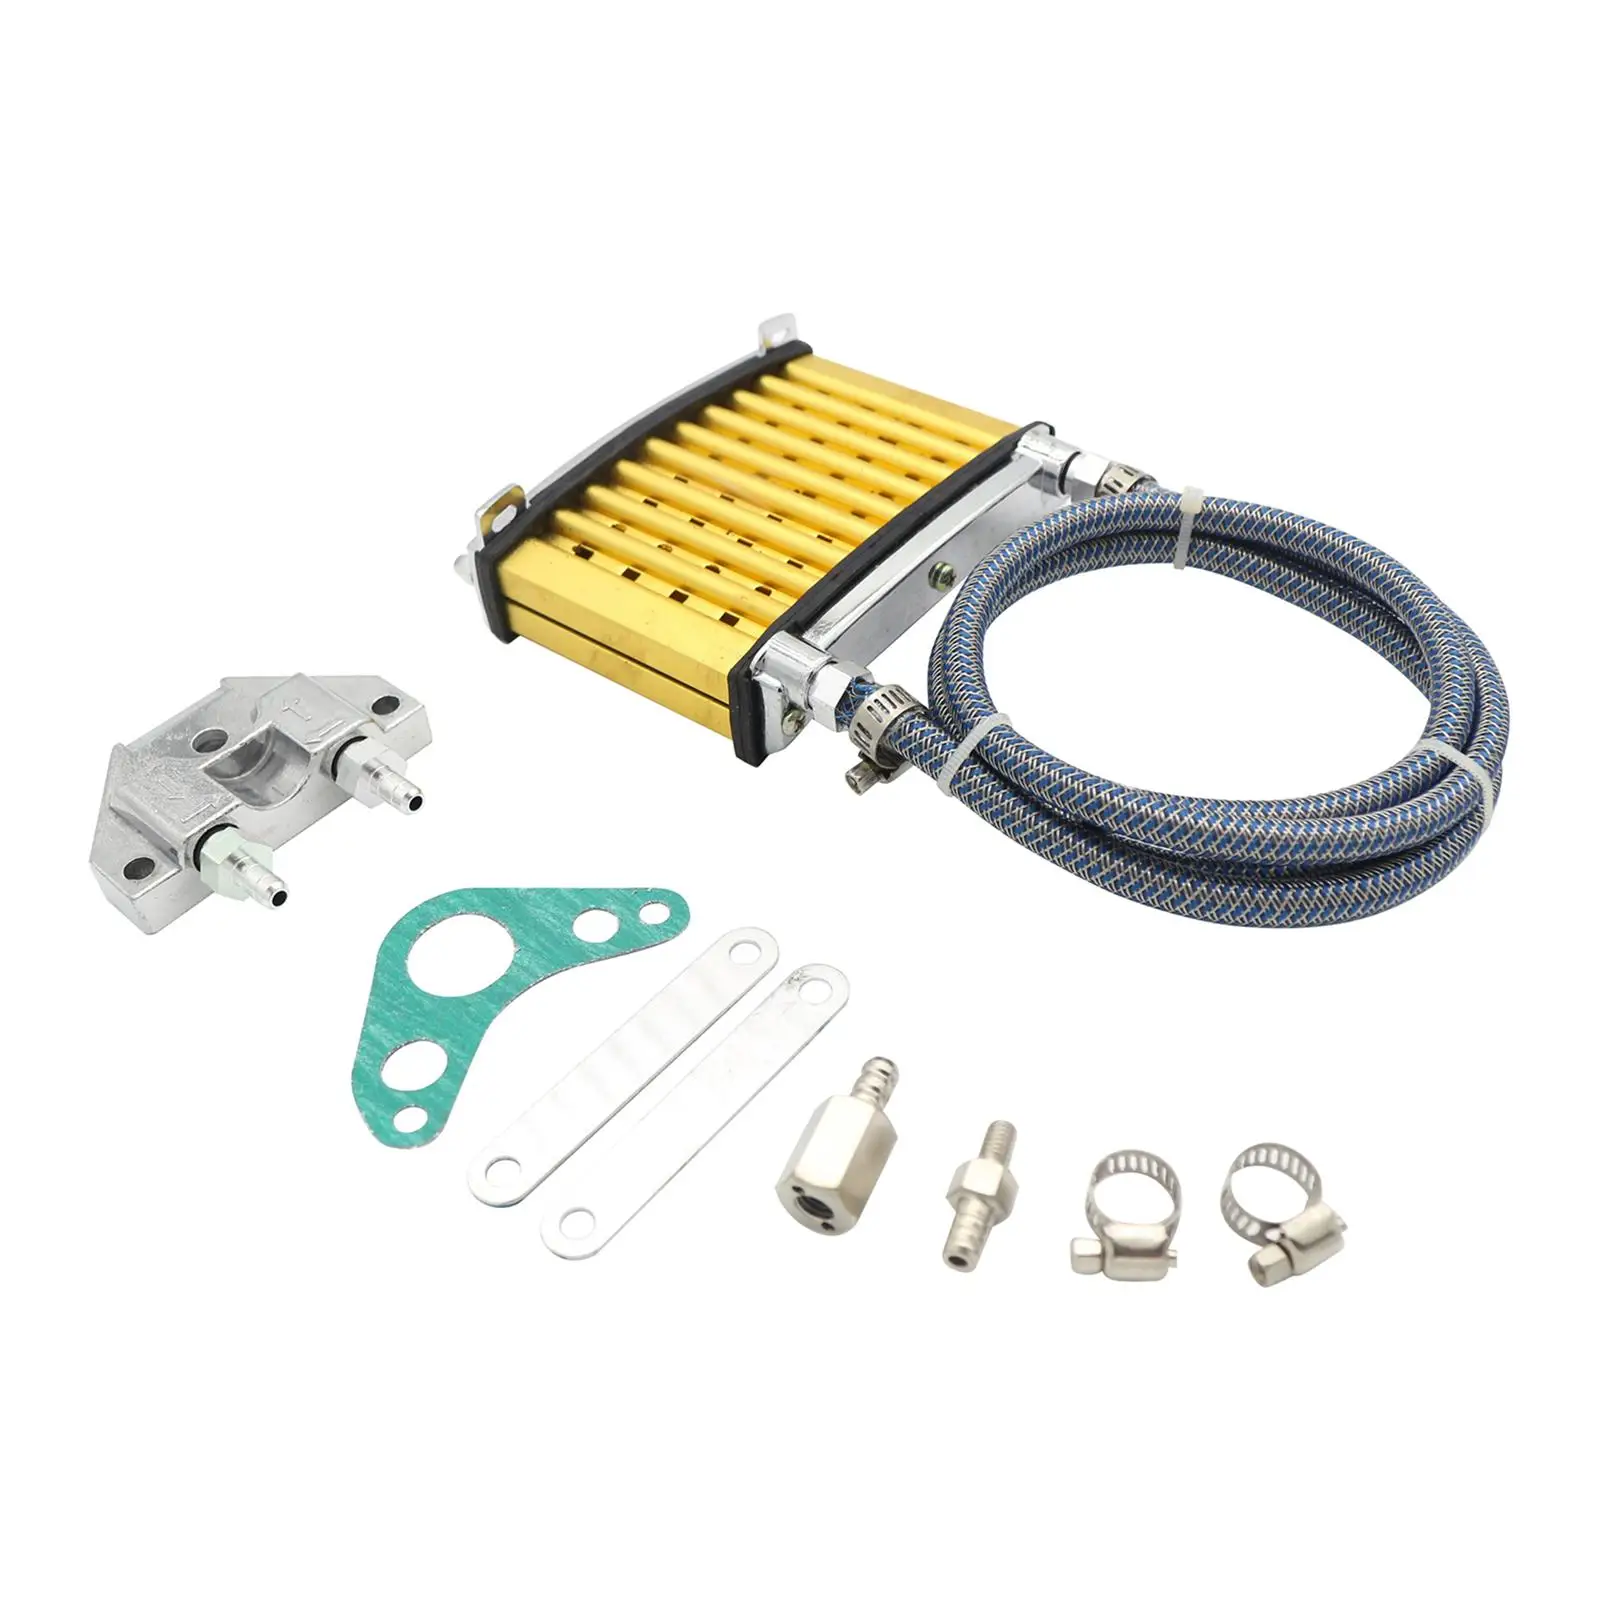 Motorcycle Engine Oil Cooler Kit Radiator System Climate Control Aluminum Modification Parts for Kawasaki 125cc 140cc 150cc